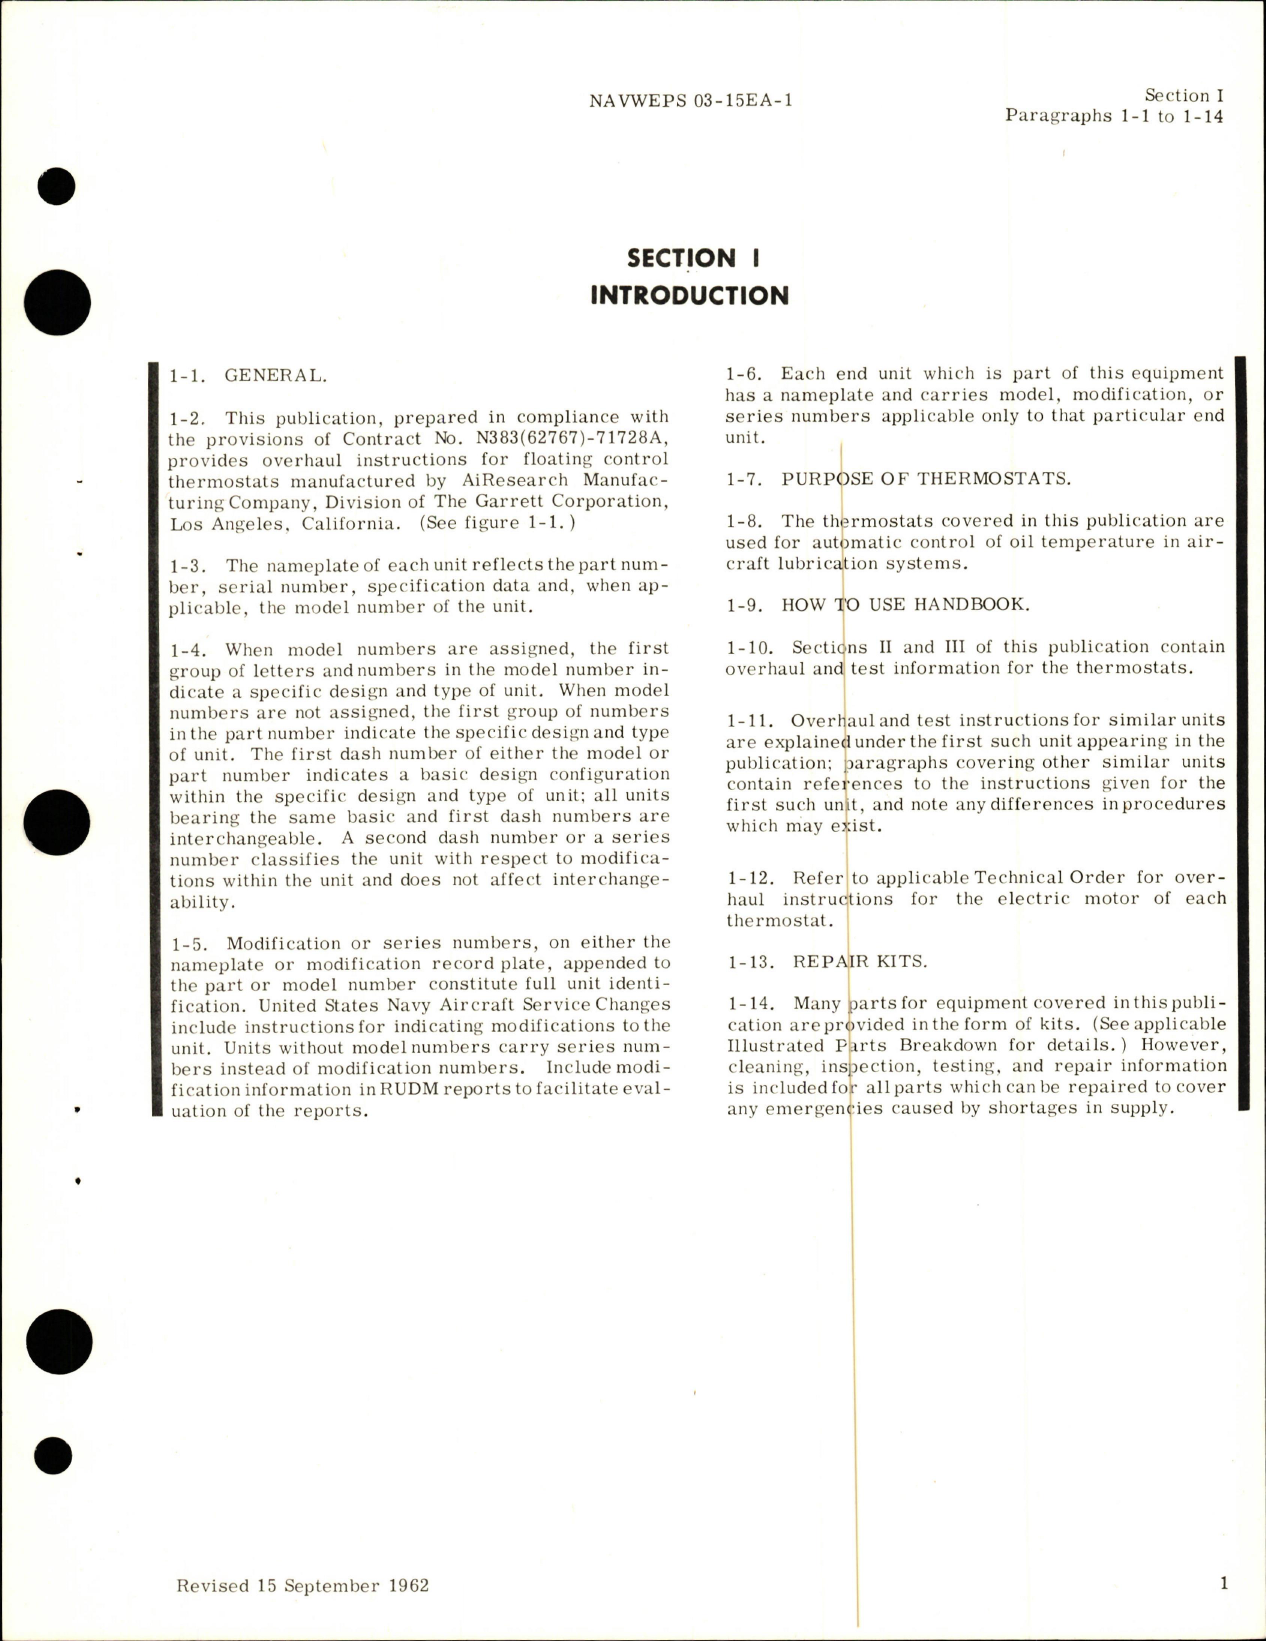 Sample page 5 from AirCorps Library document: Overhaul Instructions for Floating Control Thermostats 